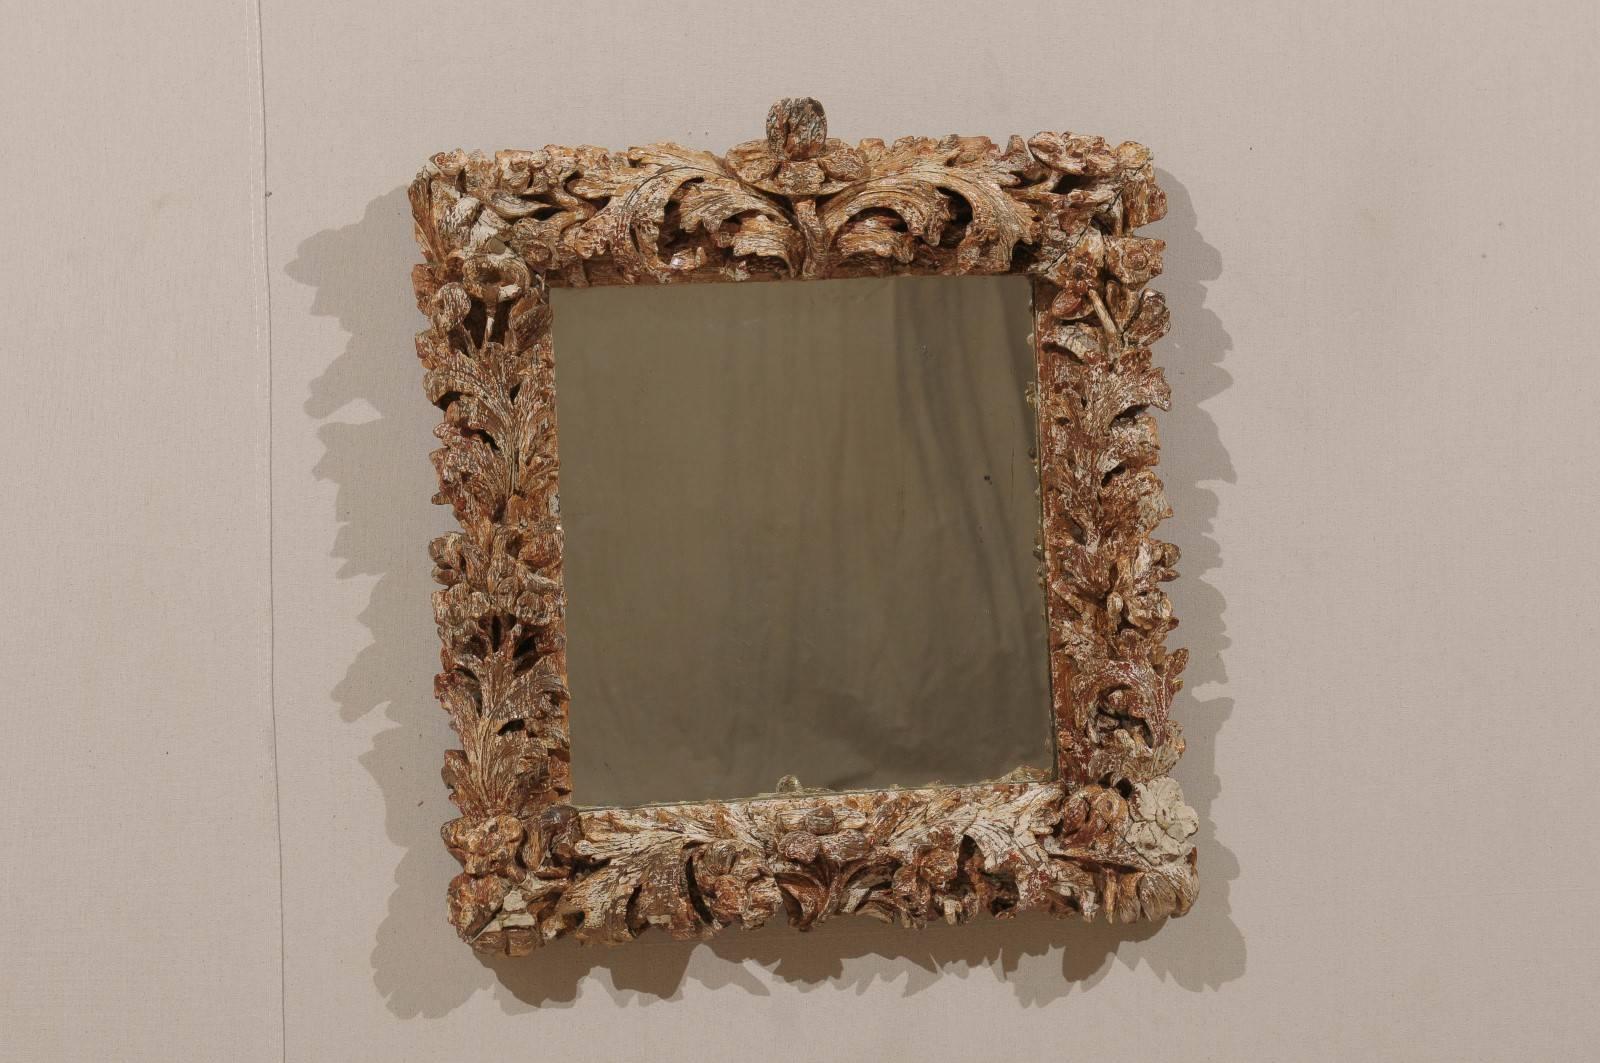 An Italian late 17th-early 18th century mirror. This exquisite Italian mirror features a richly carved surround with foliage motifs. This Italian mirror features traces of antique gilt over gesso. The overall color is brown with some traces of red